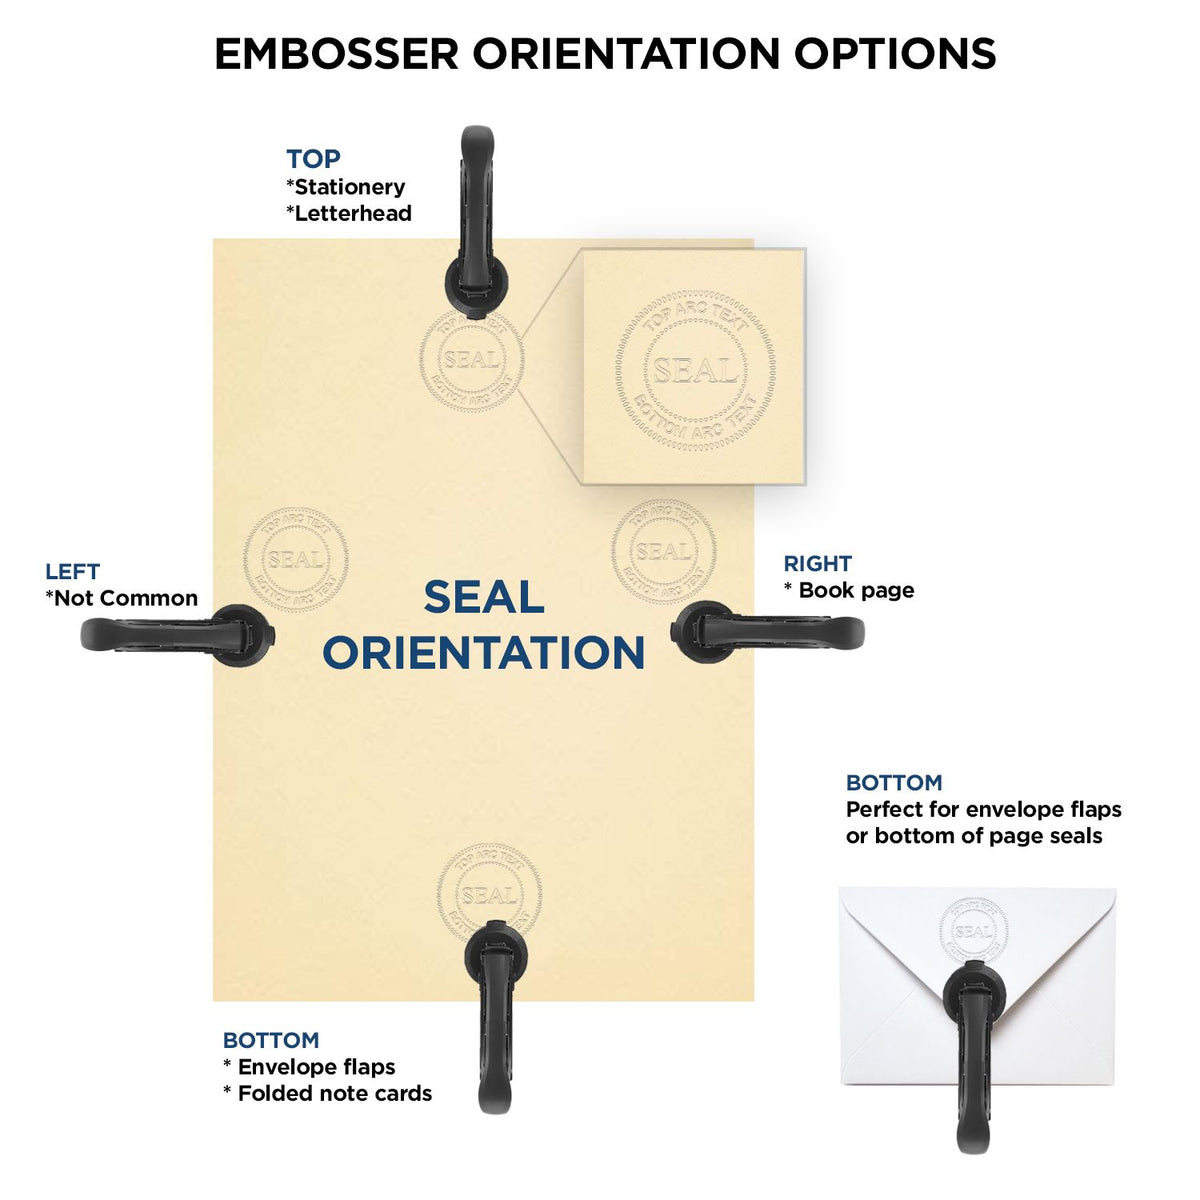 An infographic for the State of Idaho Extended Long Reach Engineer Seal showing embosser orientation, this is showing examples of a top, bottom, right and left insert.